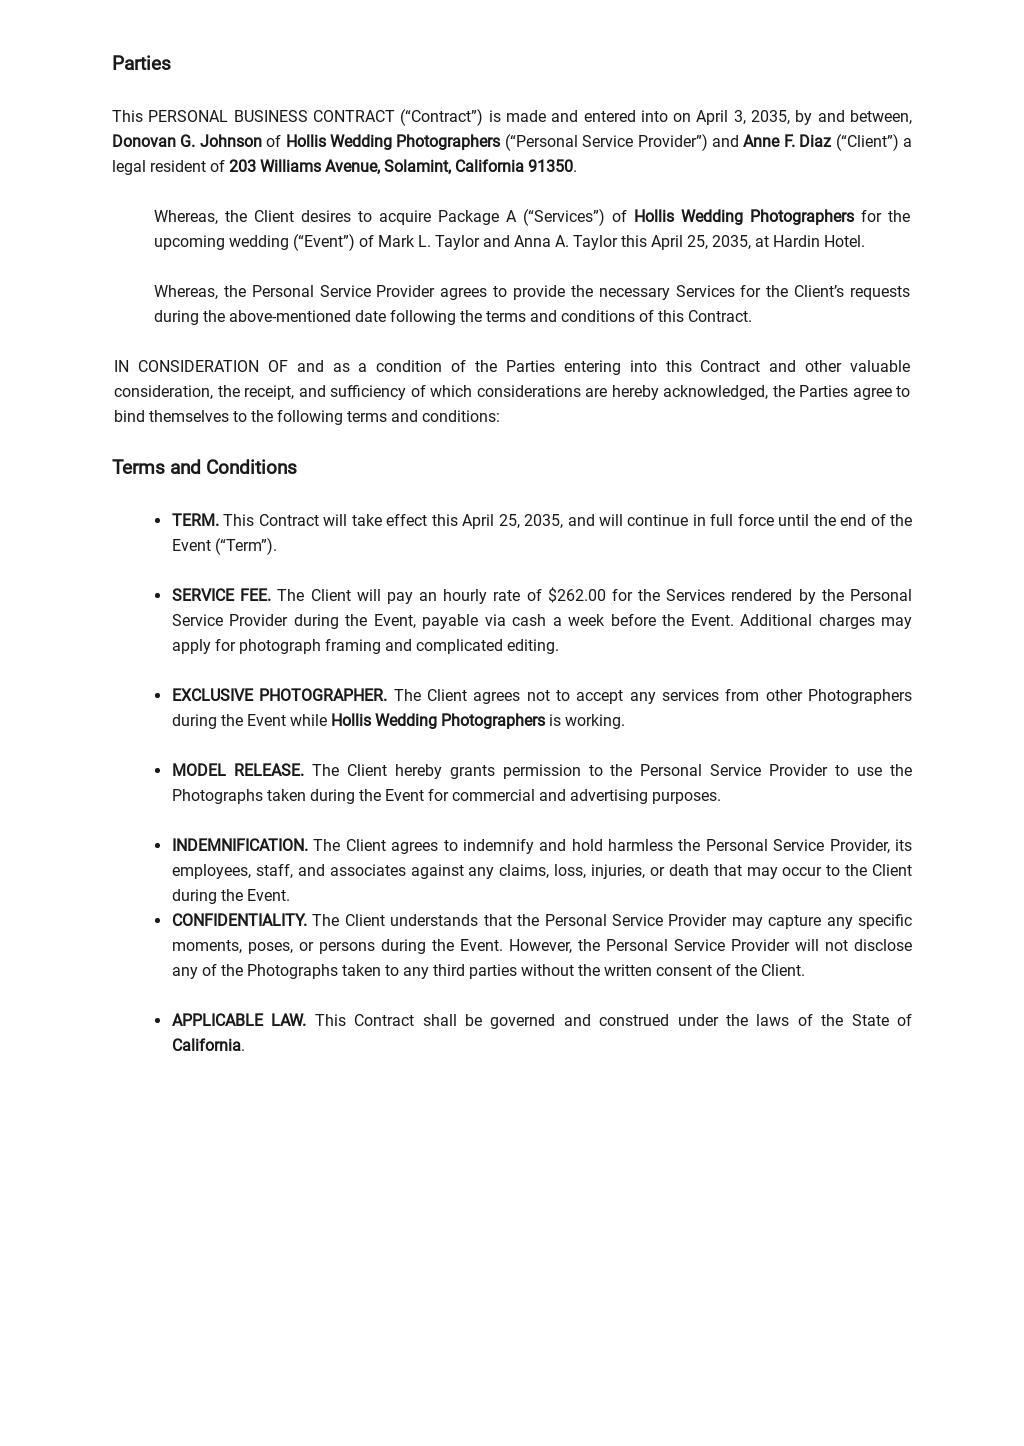 Personal Business Contract Template 1.jpe